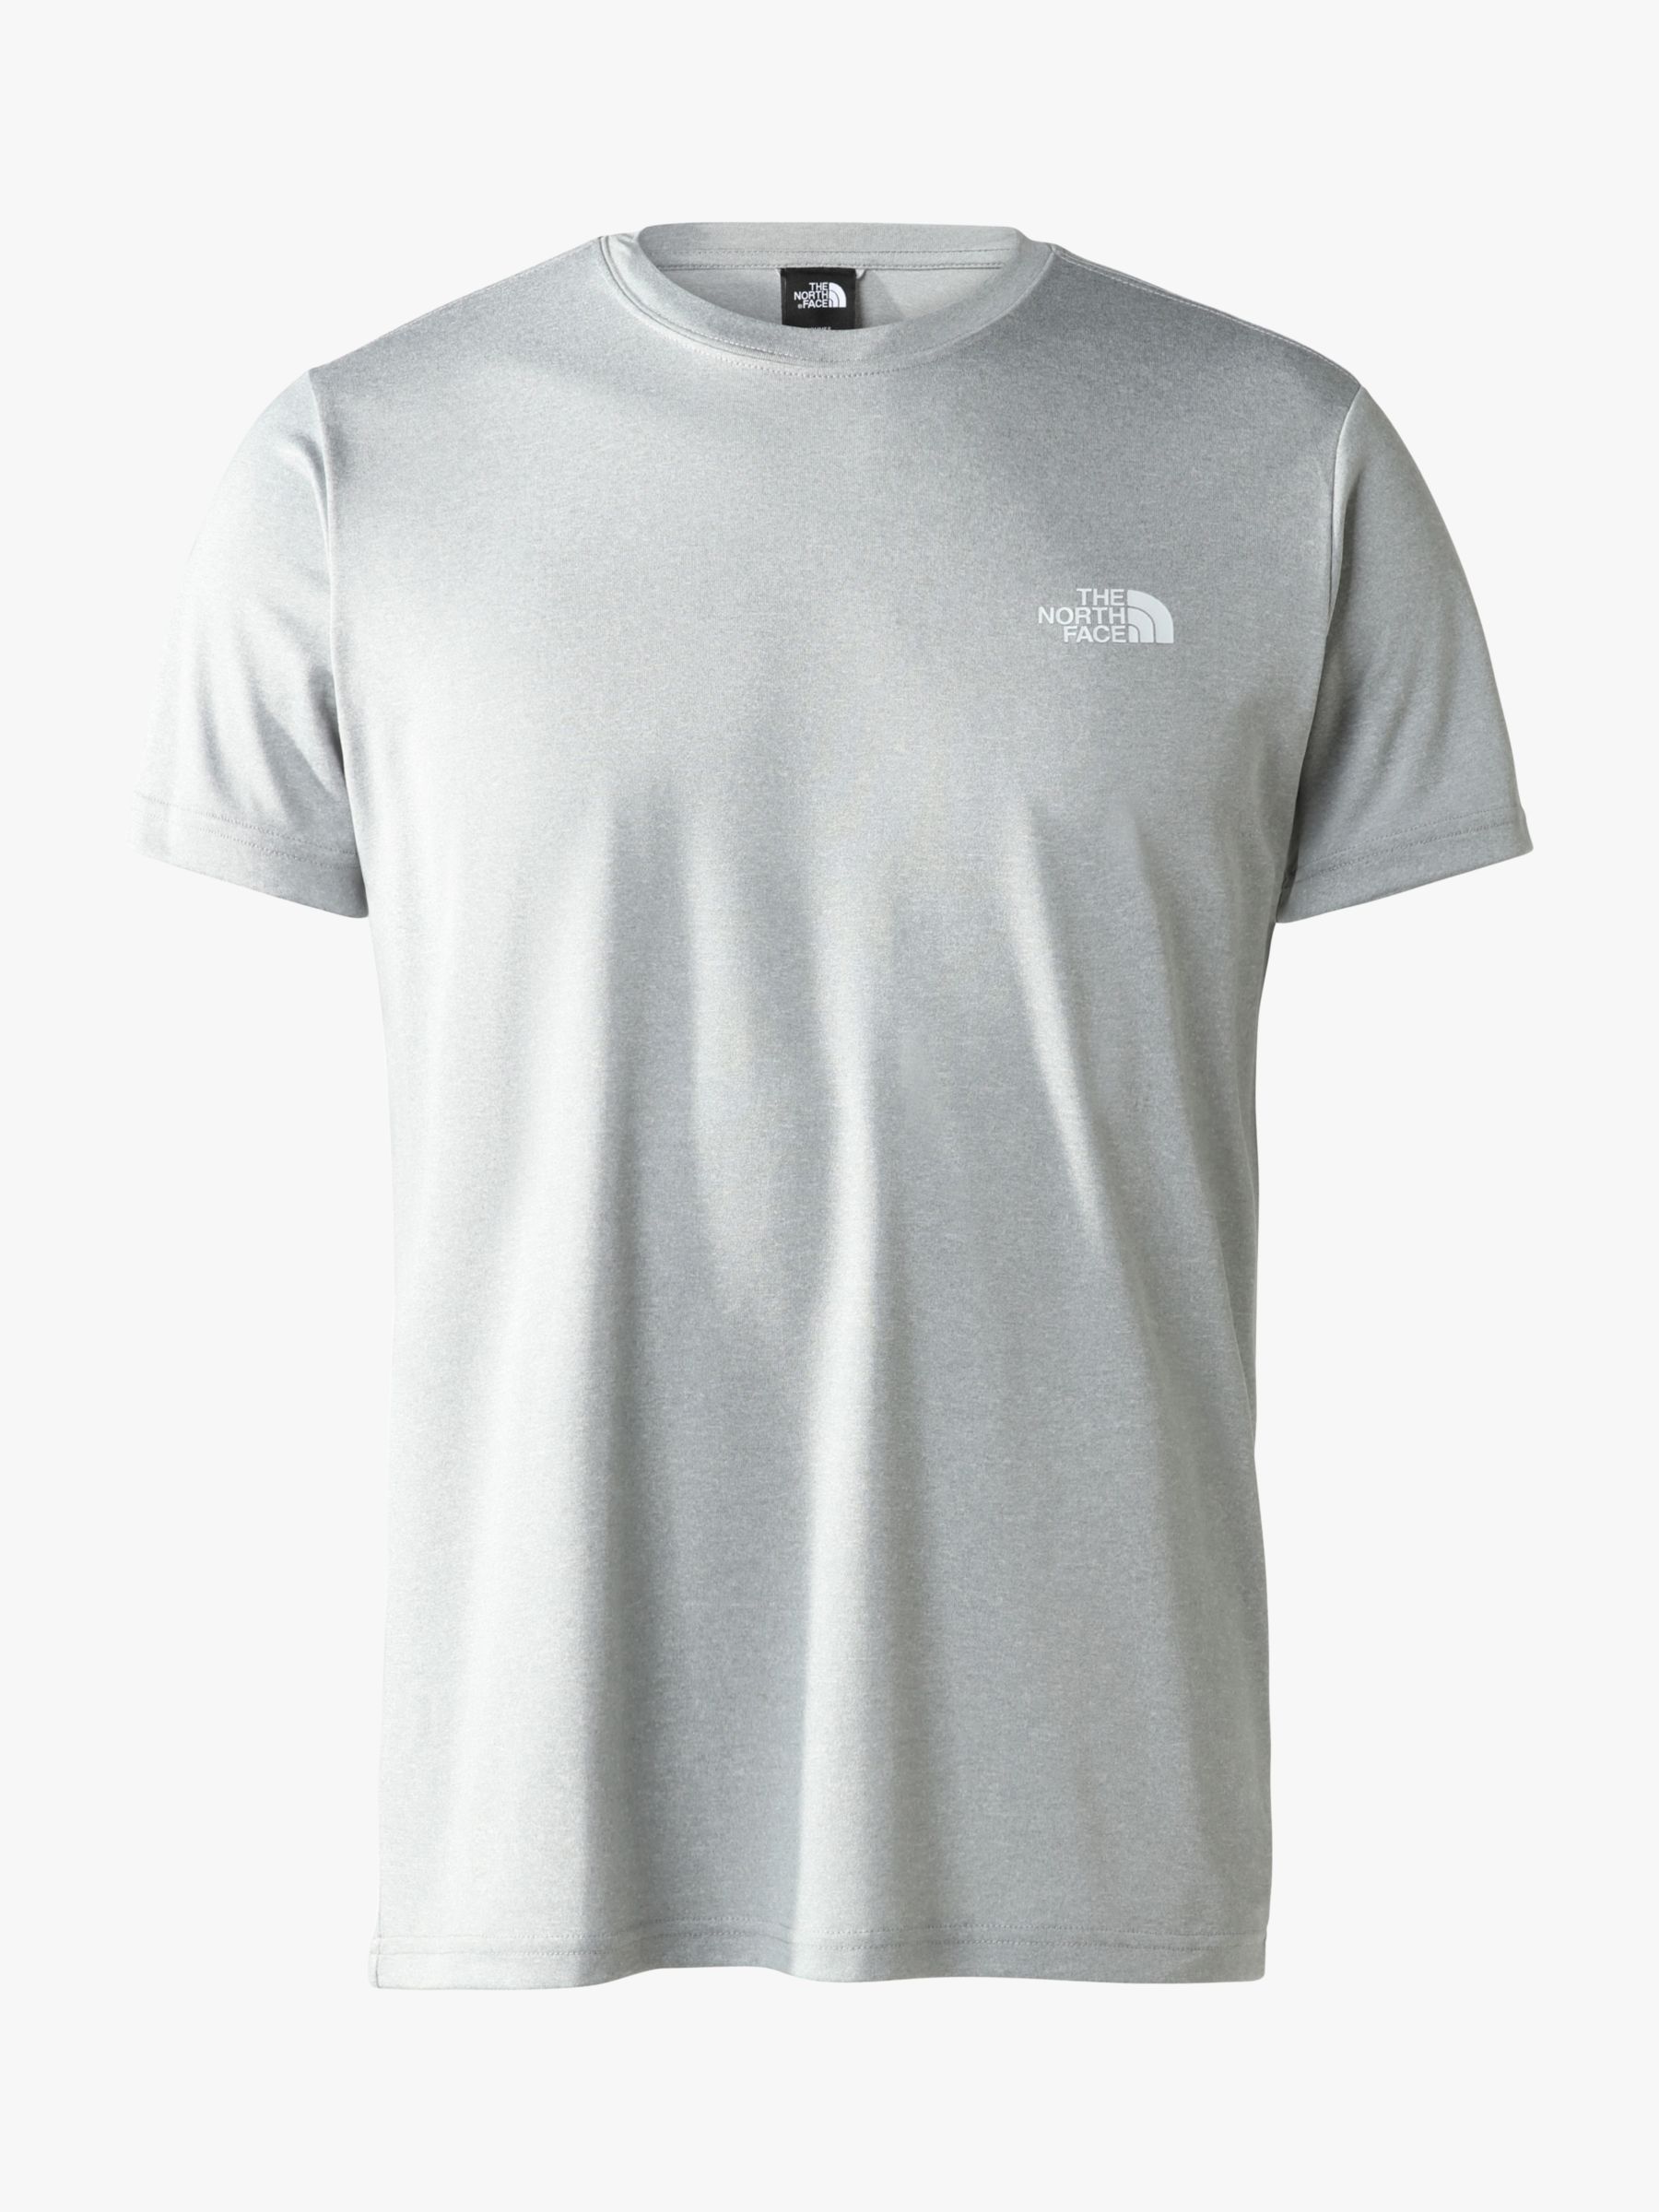 Buy The North Face Reaxion Redbox T-Shirt Online at johnlewis.com